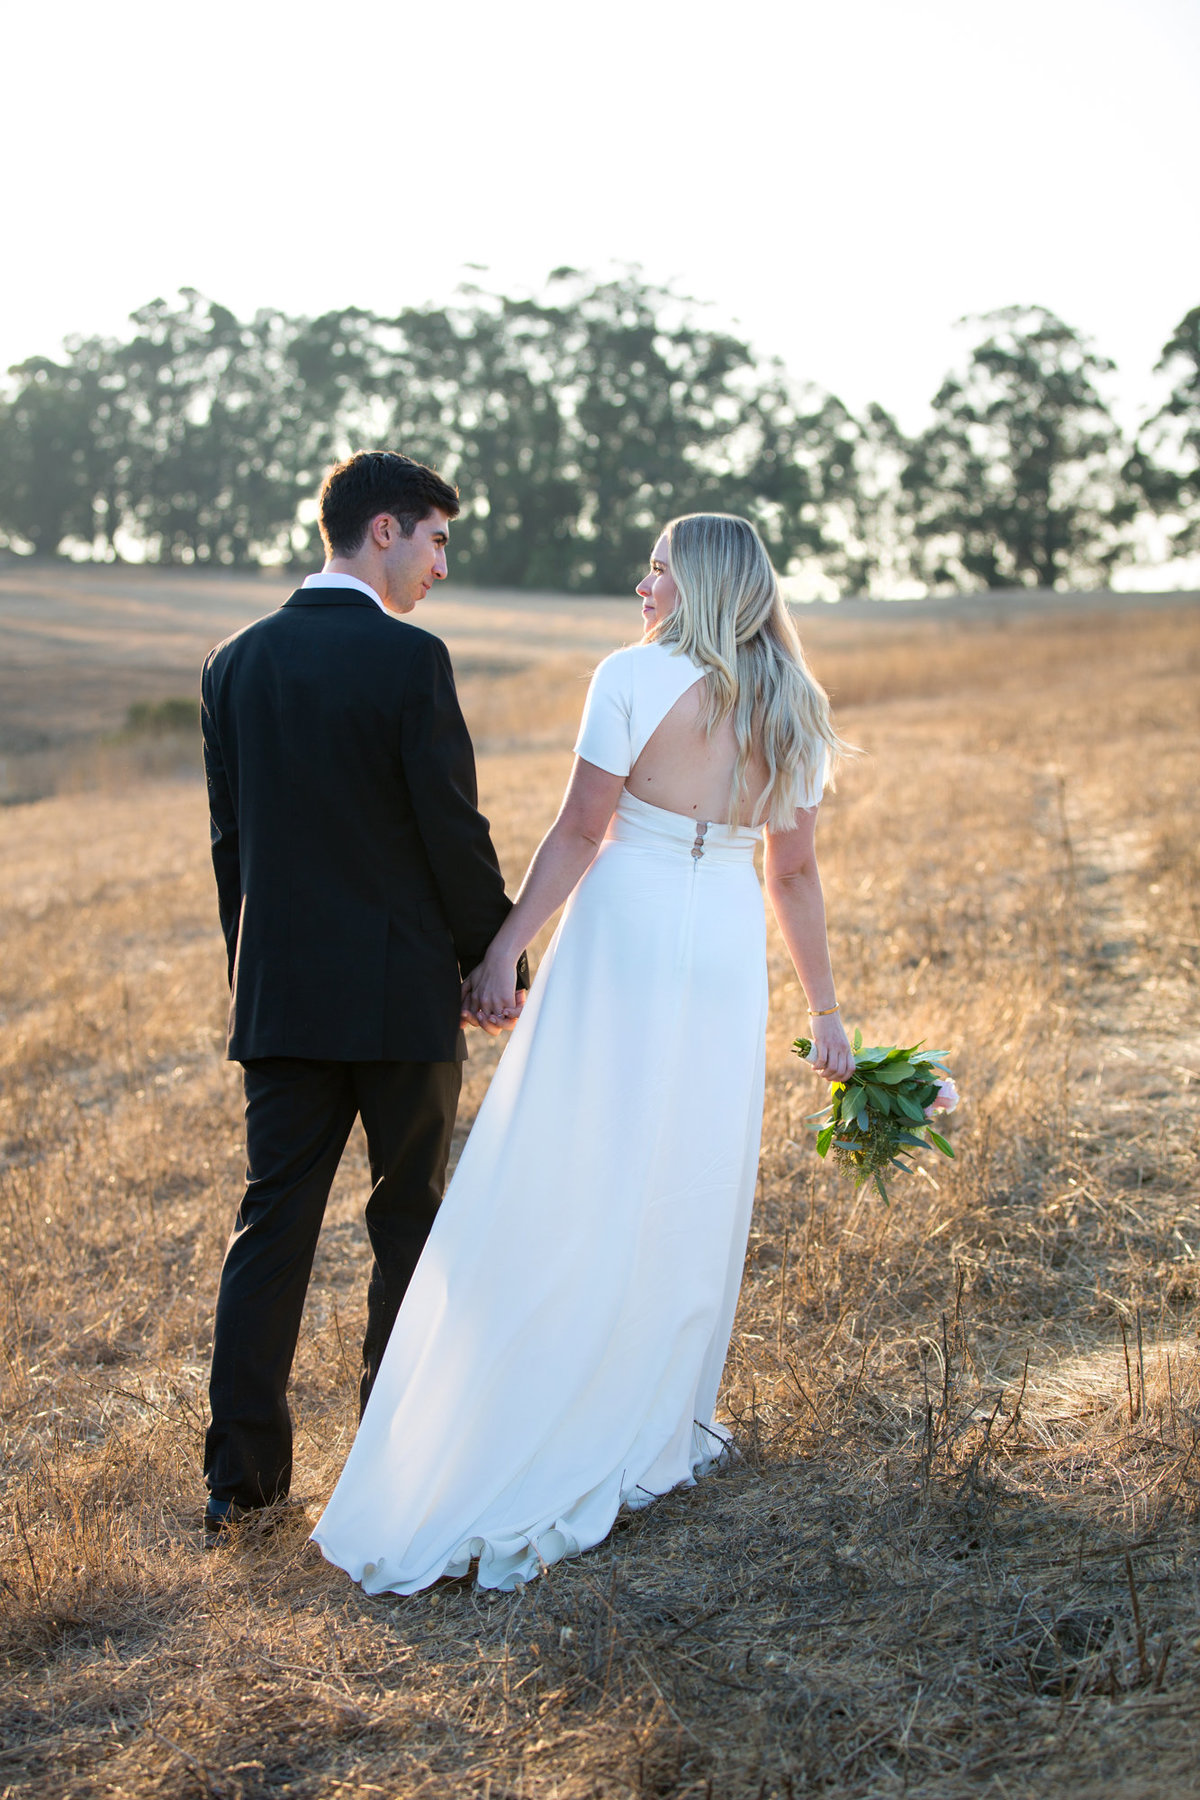 Sunset at Arastradero Park in Palo Alto for Beautiful Engagement Photos